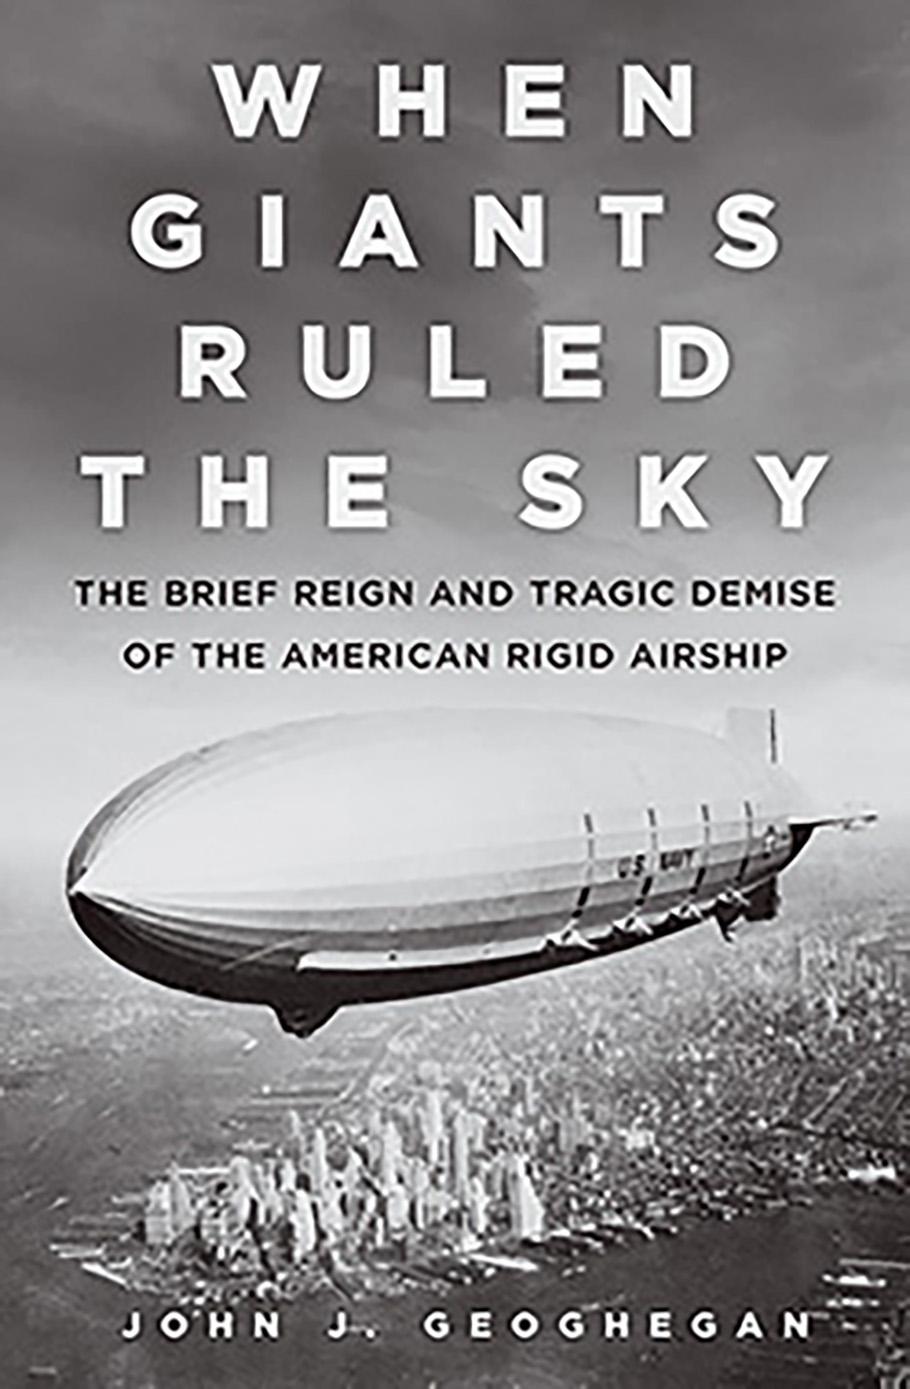 A book cover featuring a rigid airship and the text "When Giants Ruled the Sky"